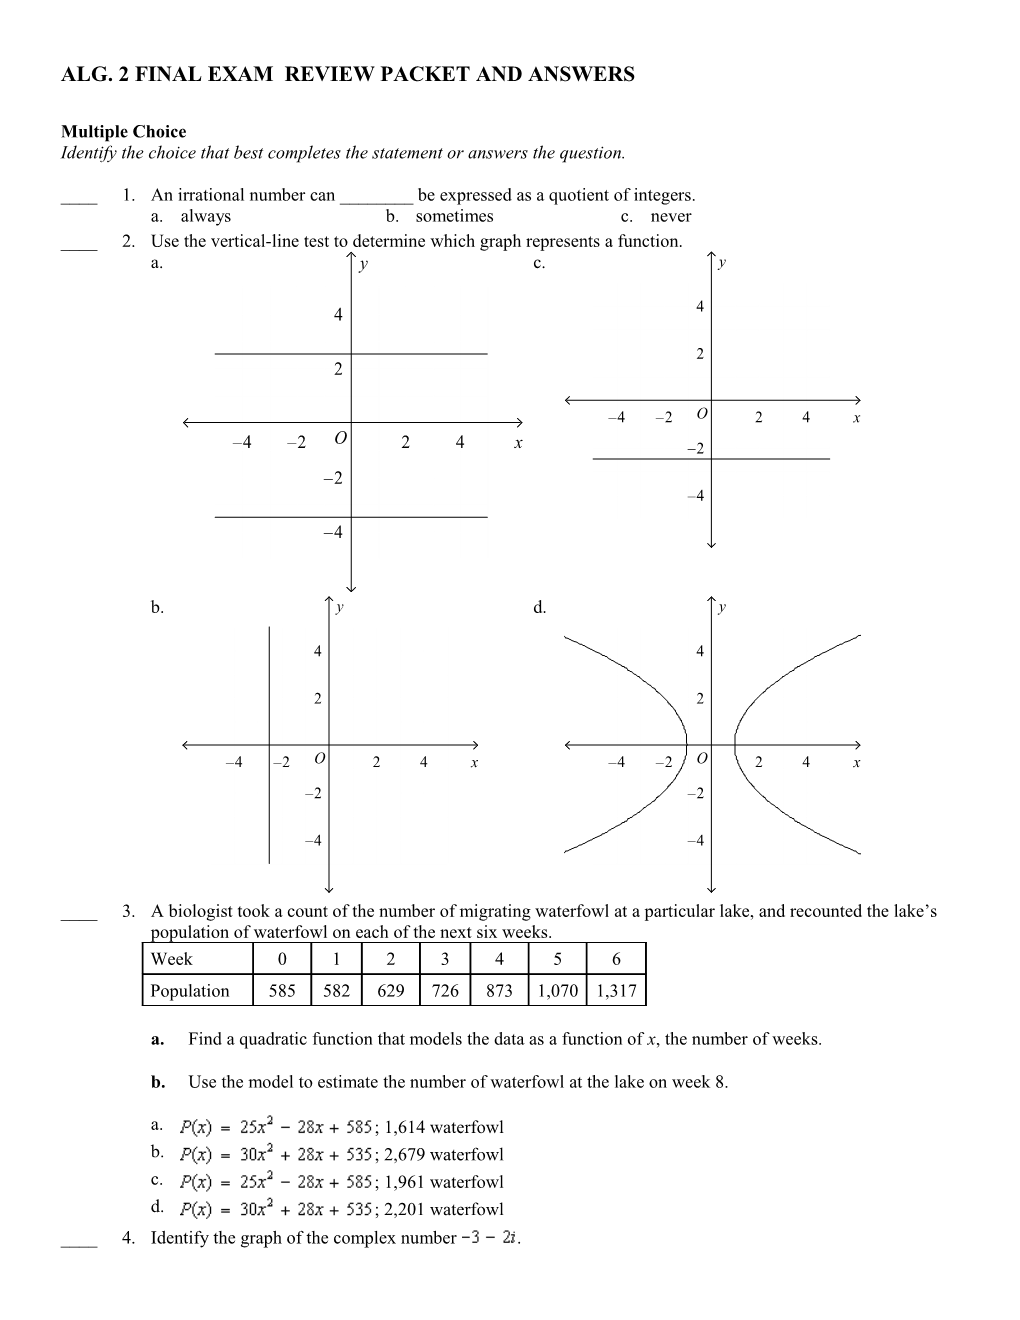 Alg. 2 Final Exam Review Packet and Answers